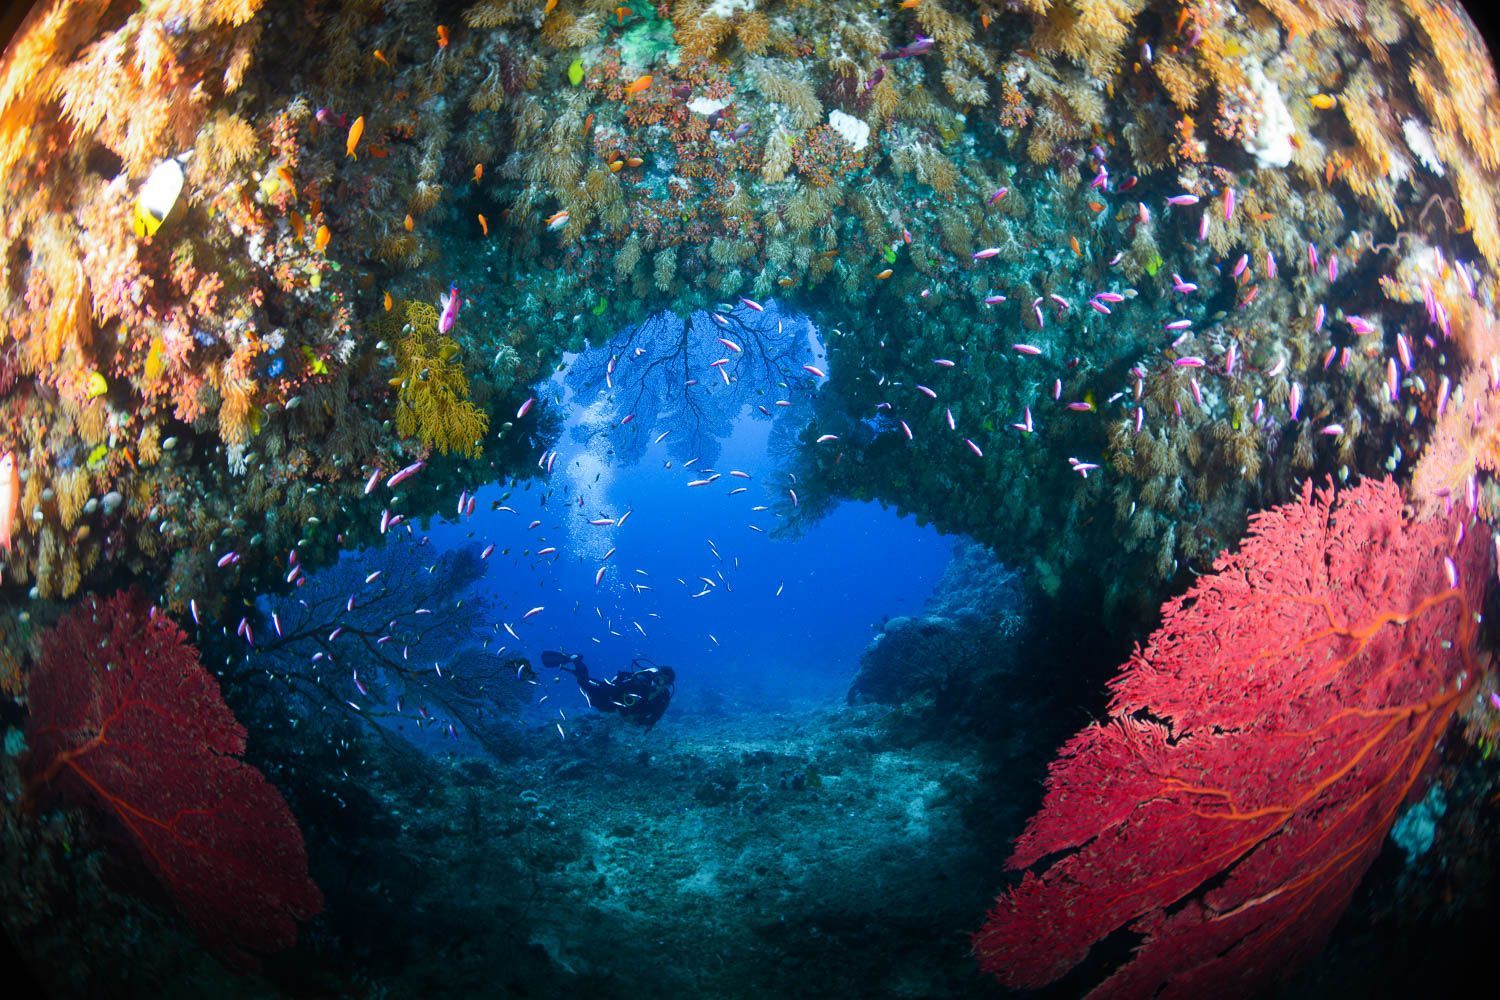 A diver swims through the tunnel in the coral reef in Fiji visiting Beqa Lagoon Resort.